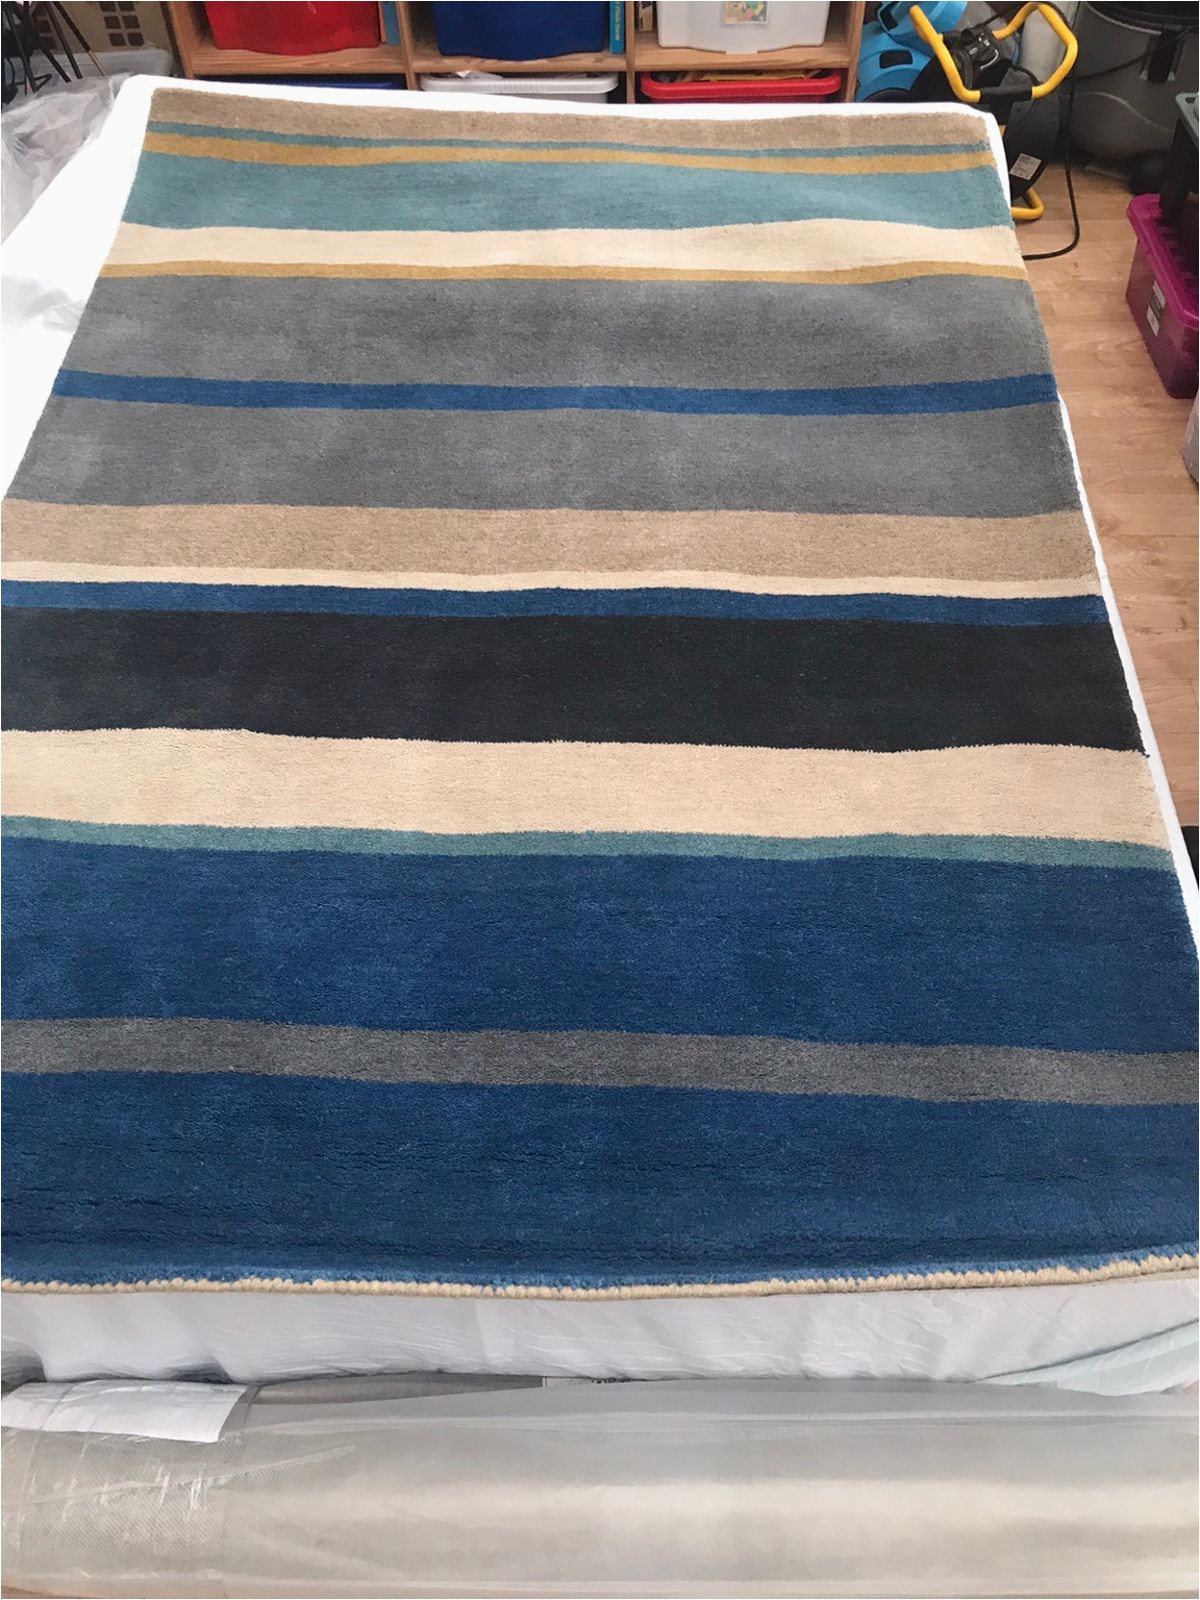 Blue and Cream Striped Rug Large Blue Stripe Rug 120×170 New Thick